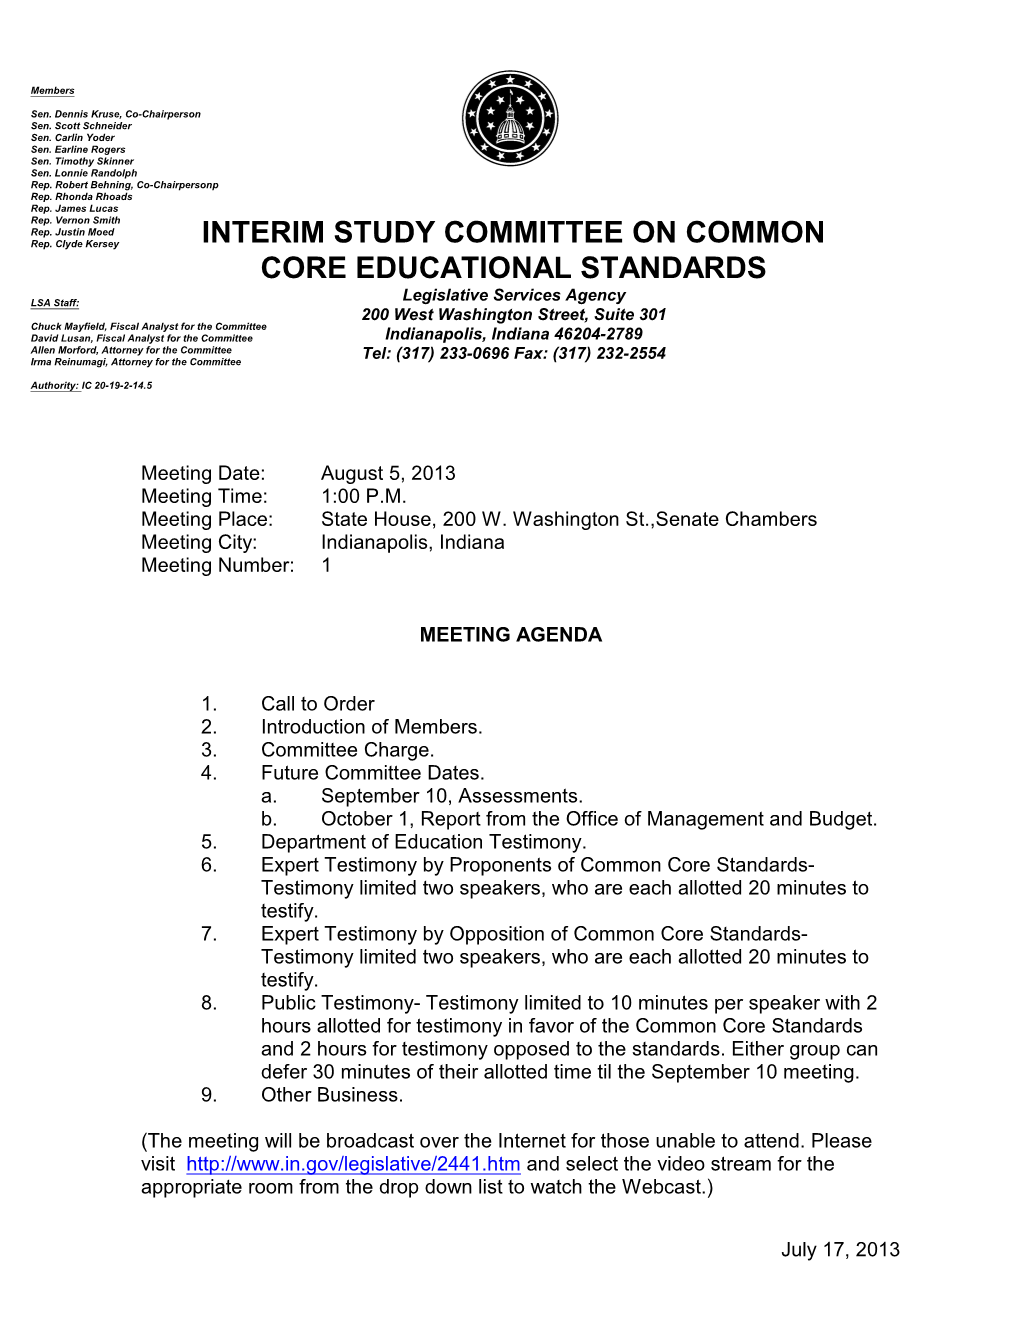 NT 8/5/2013 Interim Study Committee on Common Core Educational Stand